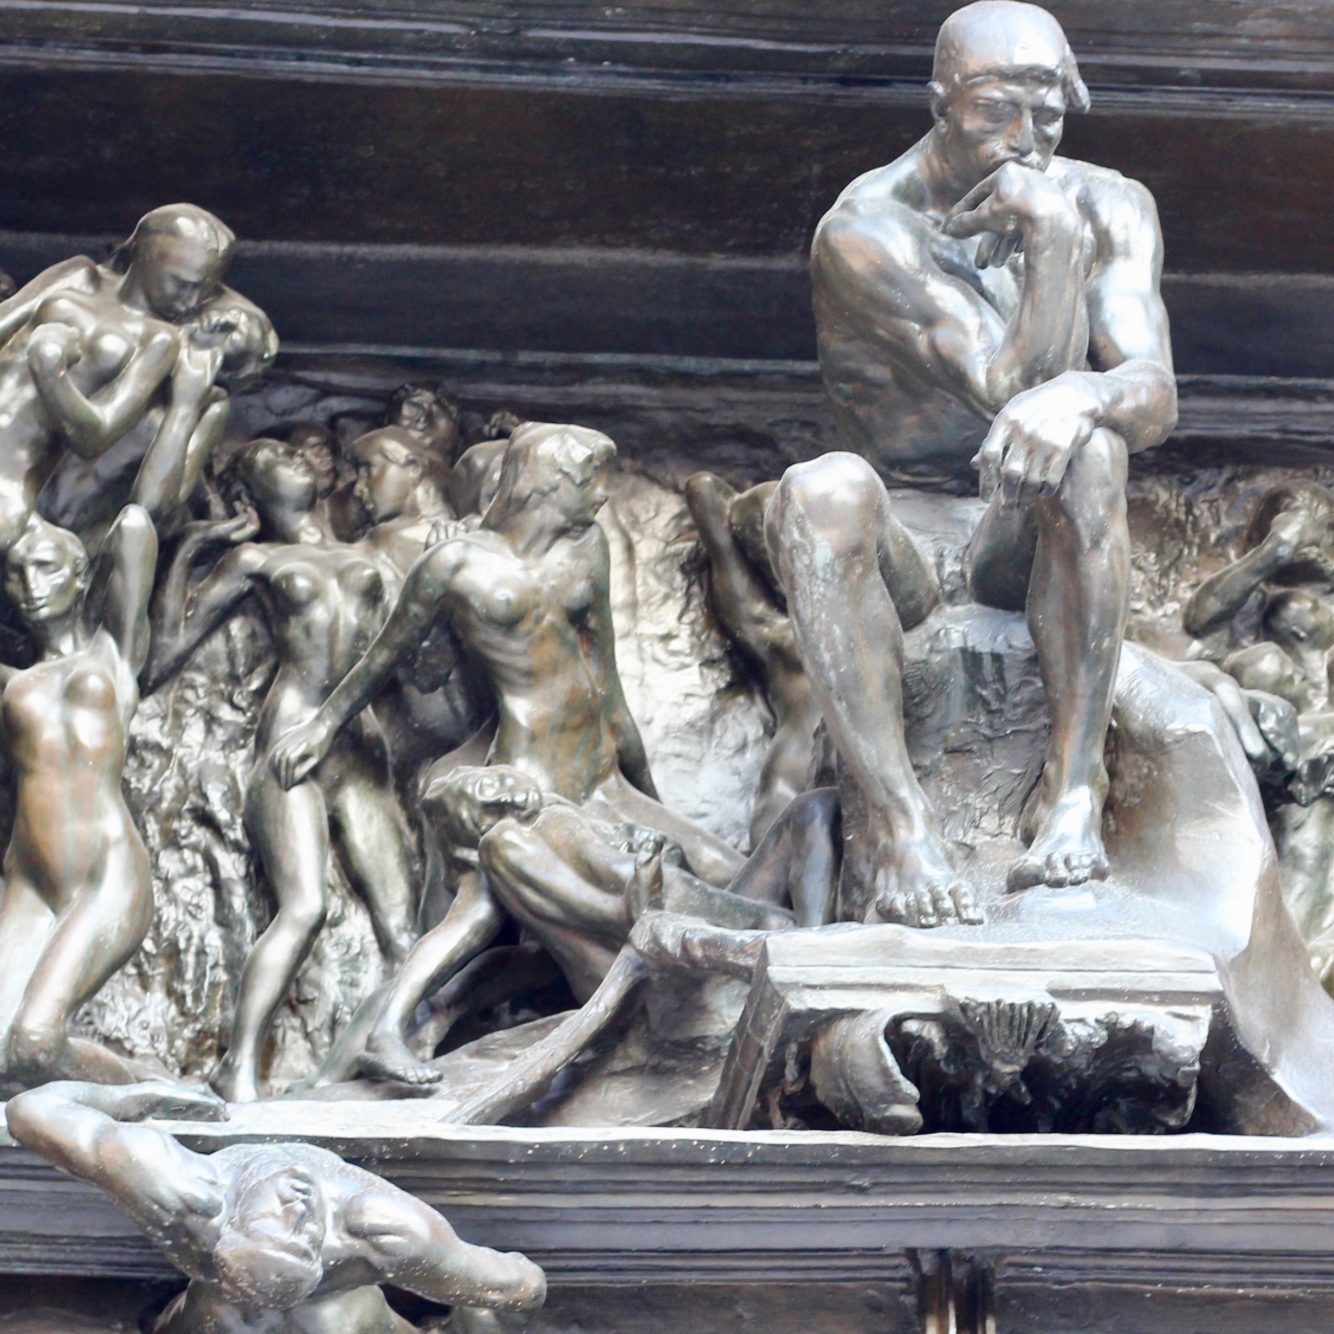 The Gates of Hell by Rodin with the statue of the Thinker